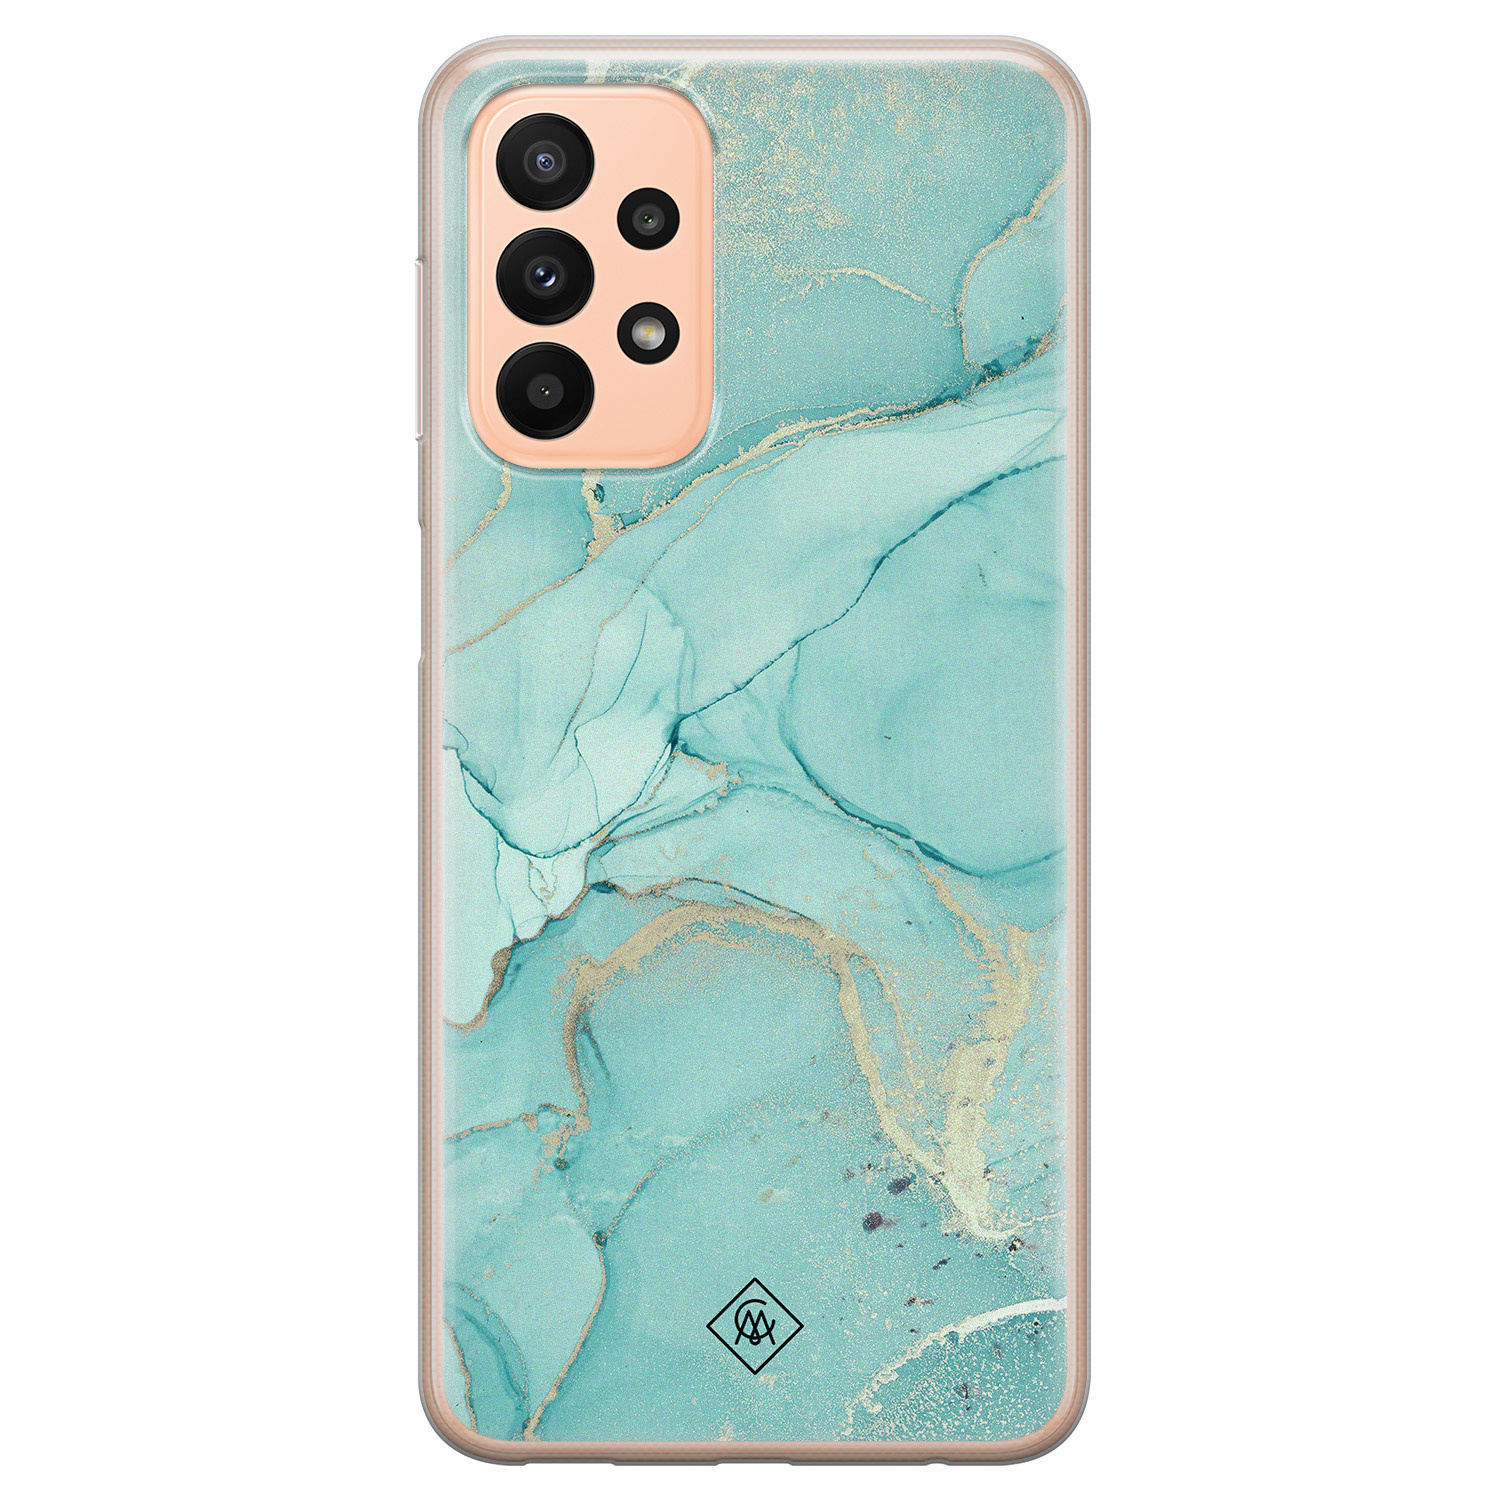 Samsung A23 hoesje siliconen - Marmer mint groen | Samsung Galaxy A23 case | mint | TPU backcover transparant